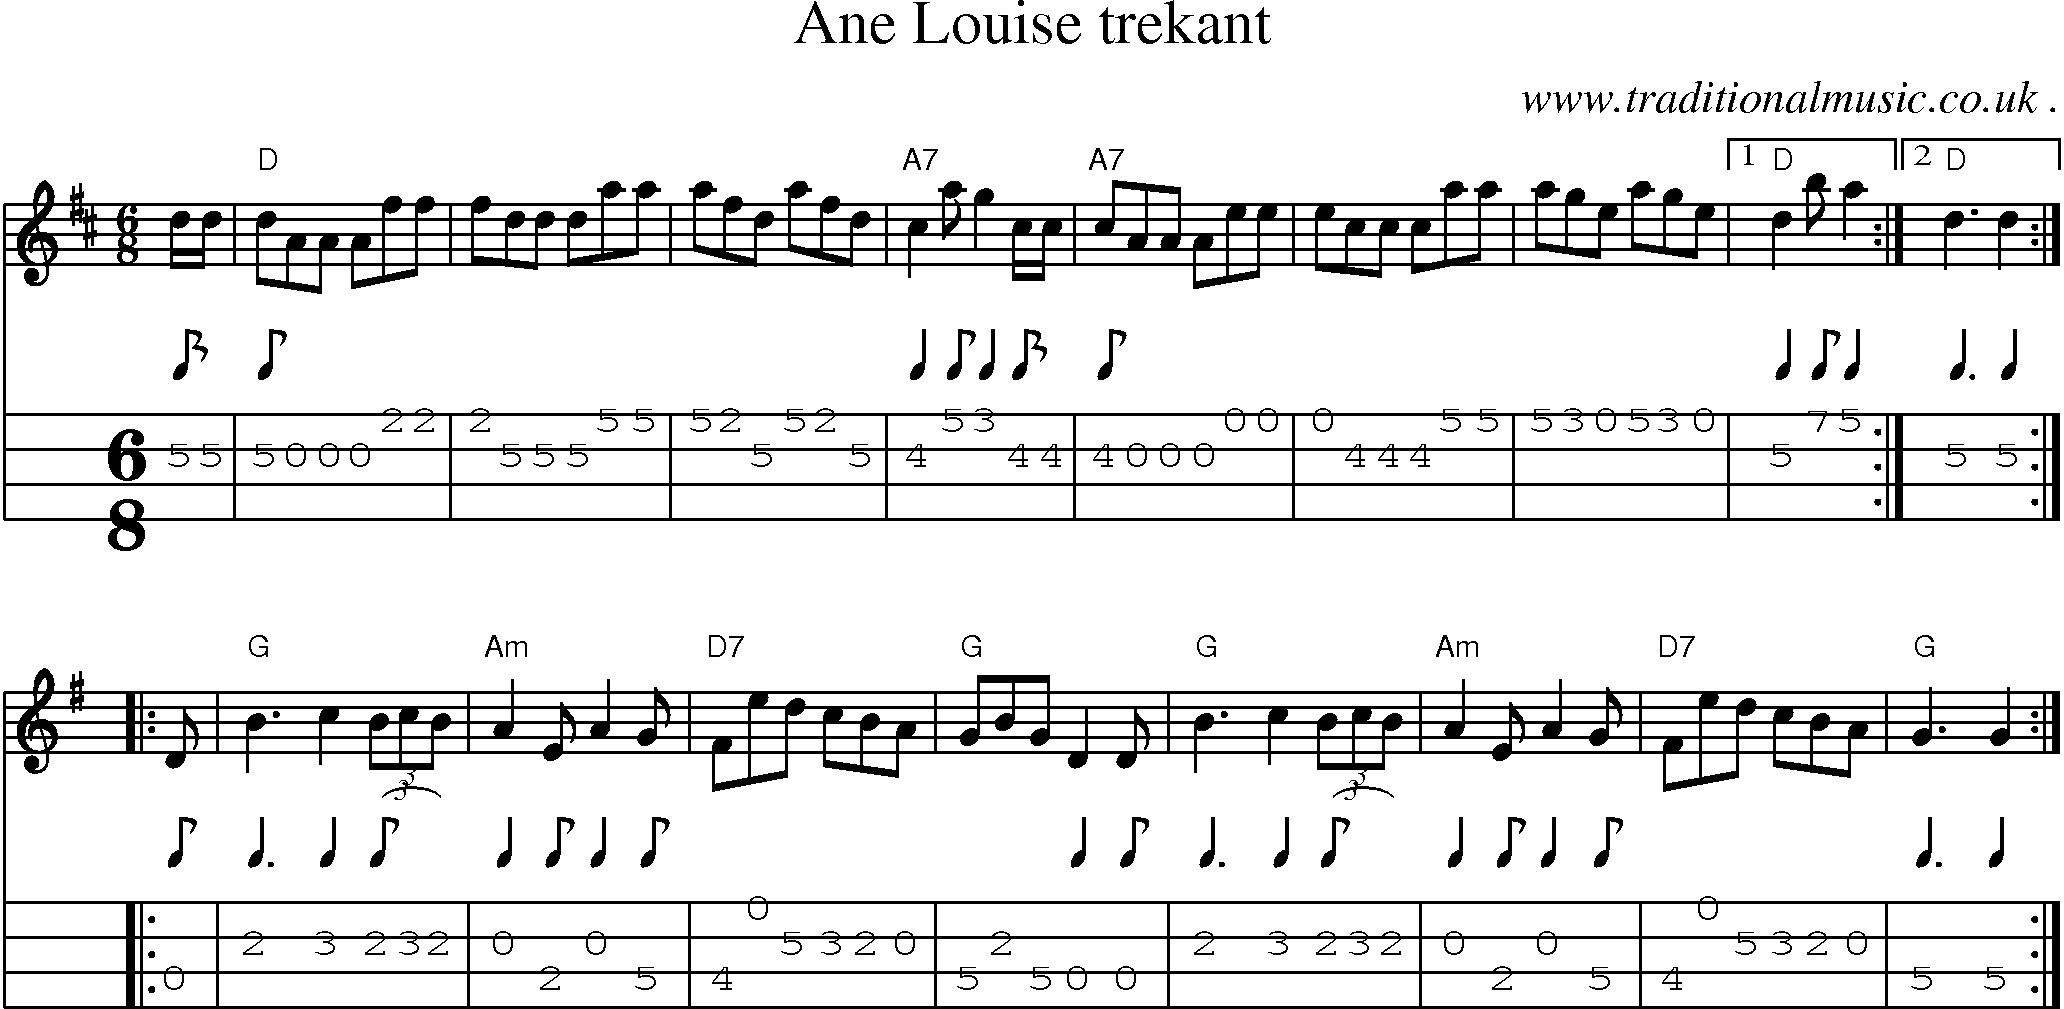 Sheet-music  score, Chords and Mandolin Tabs for Ane Louise Trekant